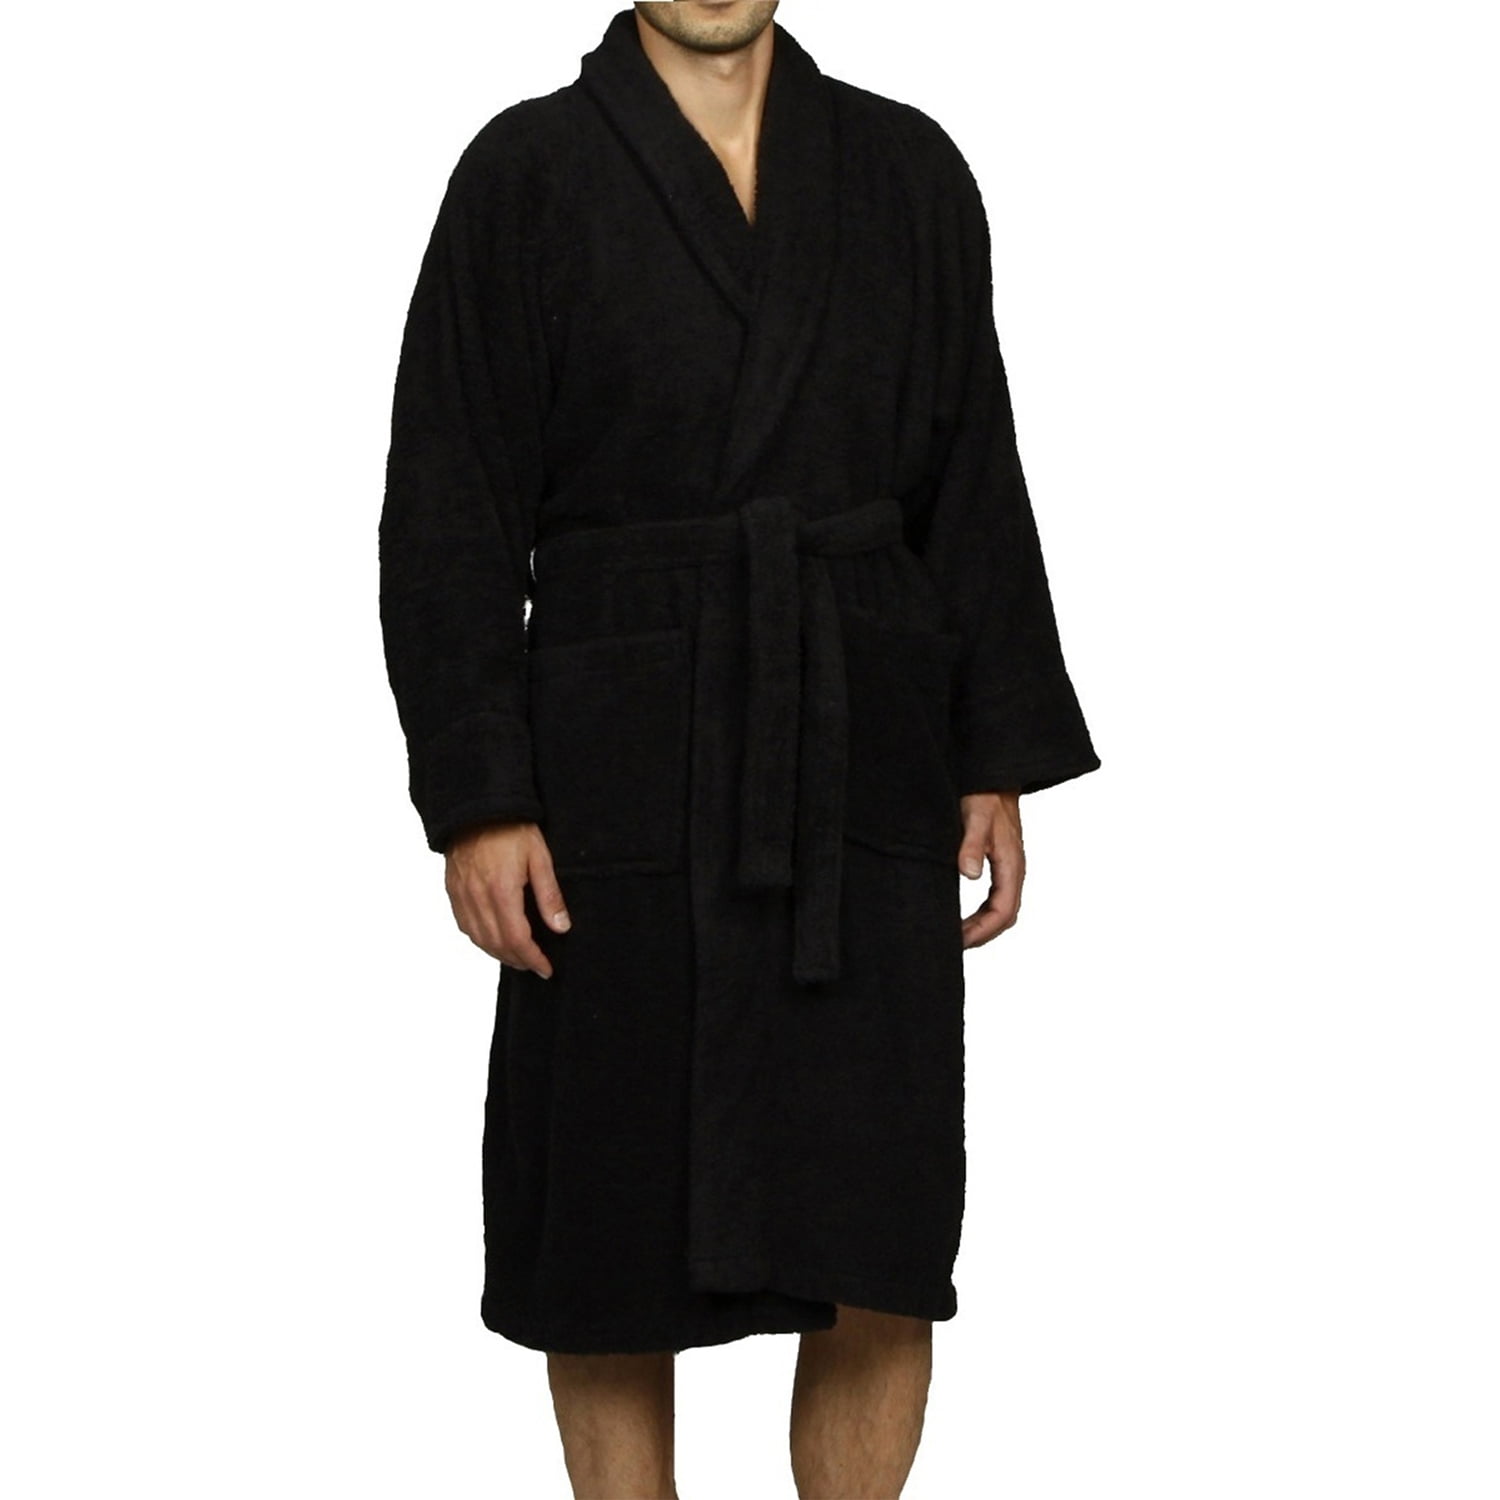 Buy Azure Blue and Black Colour Jacquard Turkish Soft Cotton Lightweight  Shawl Collar Bathrobe, Dressing Gown. Online in India - Etsy